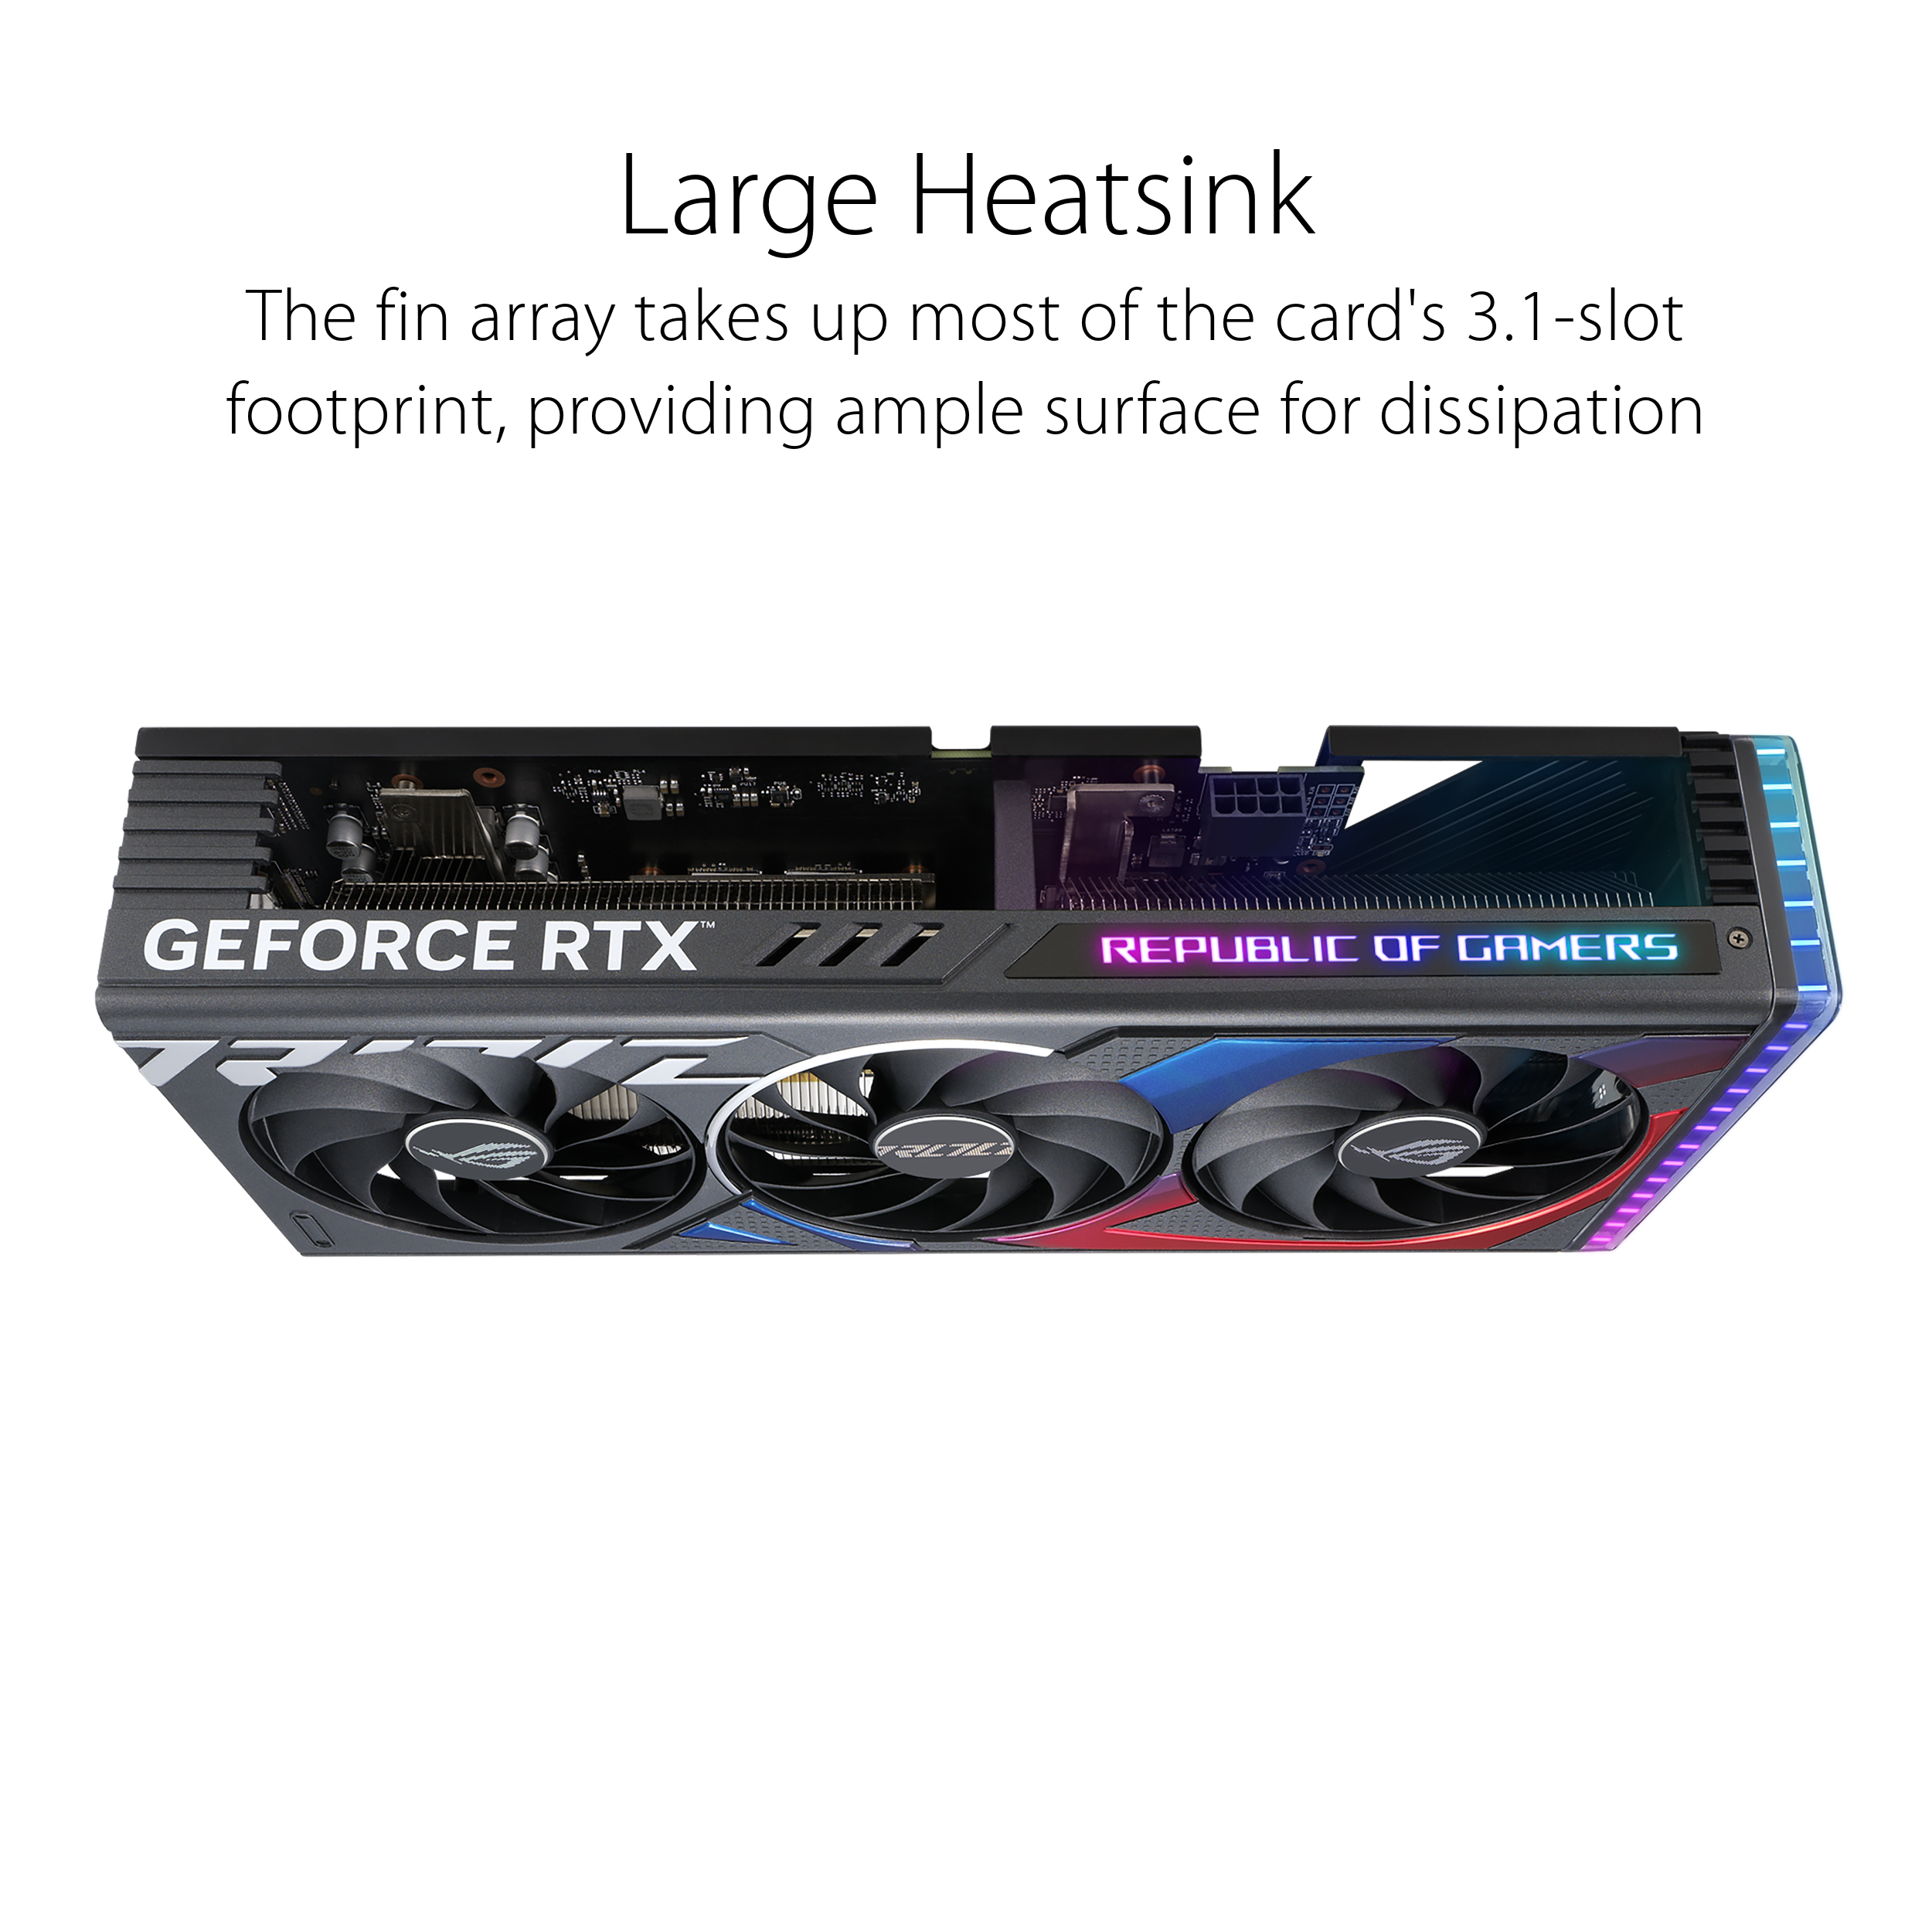 A large marketing image providing additional information about the product ASUS GeForce RTX 4060 ROG Strix OC 8GB GDDR6 - Additional alt info not provided